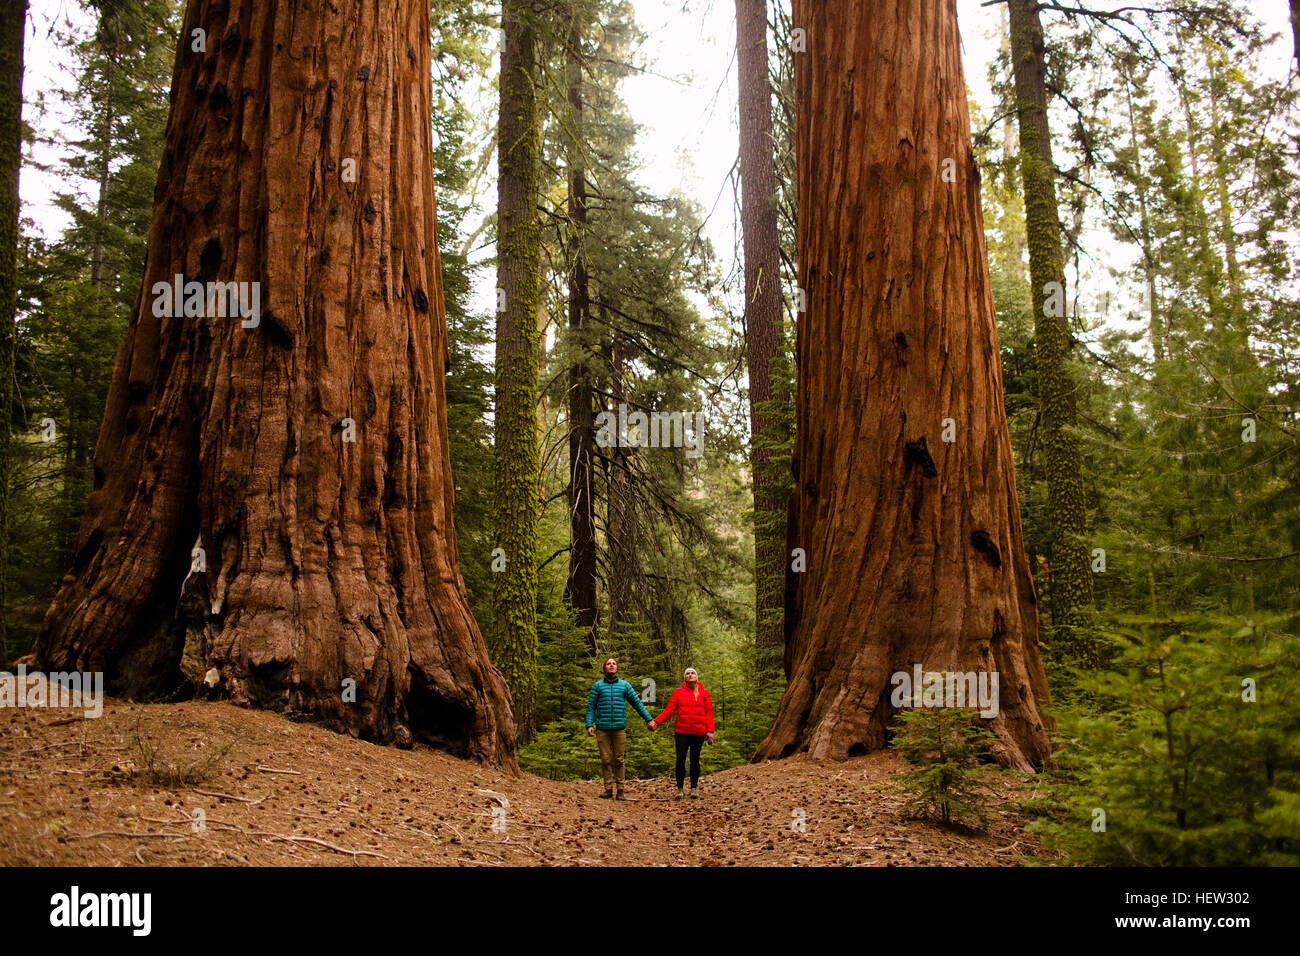 Couple walking in forest, Sequoia National Park, California, USA Stock Photo